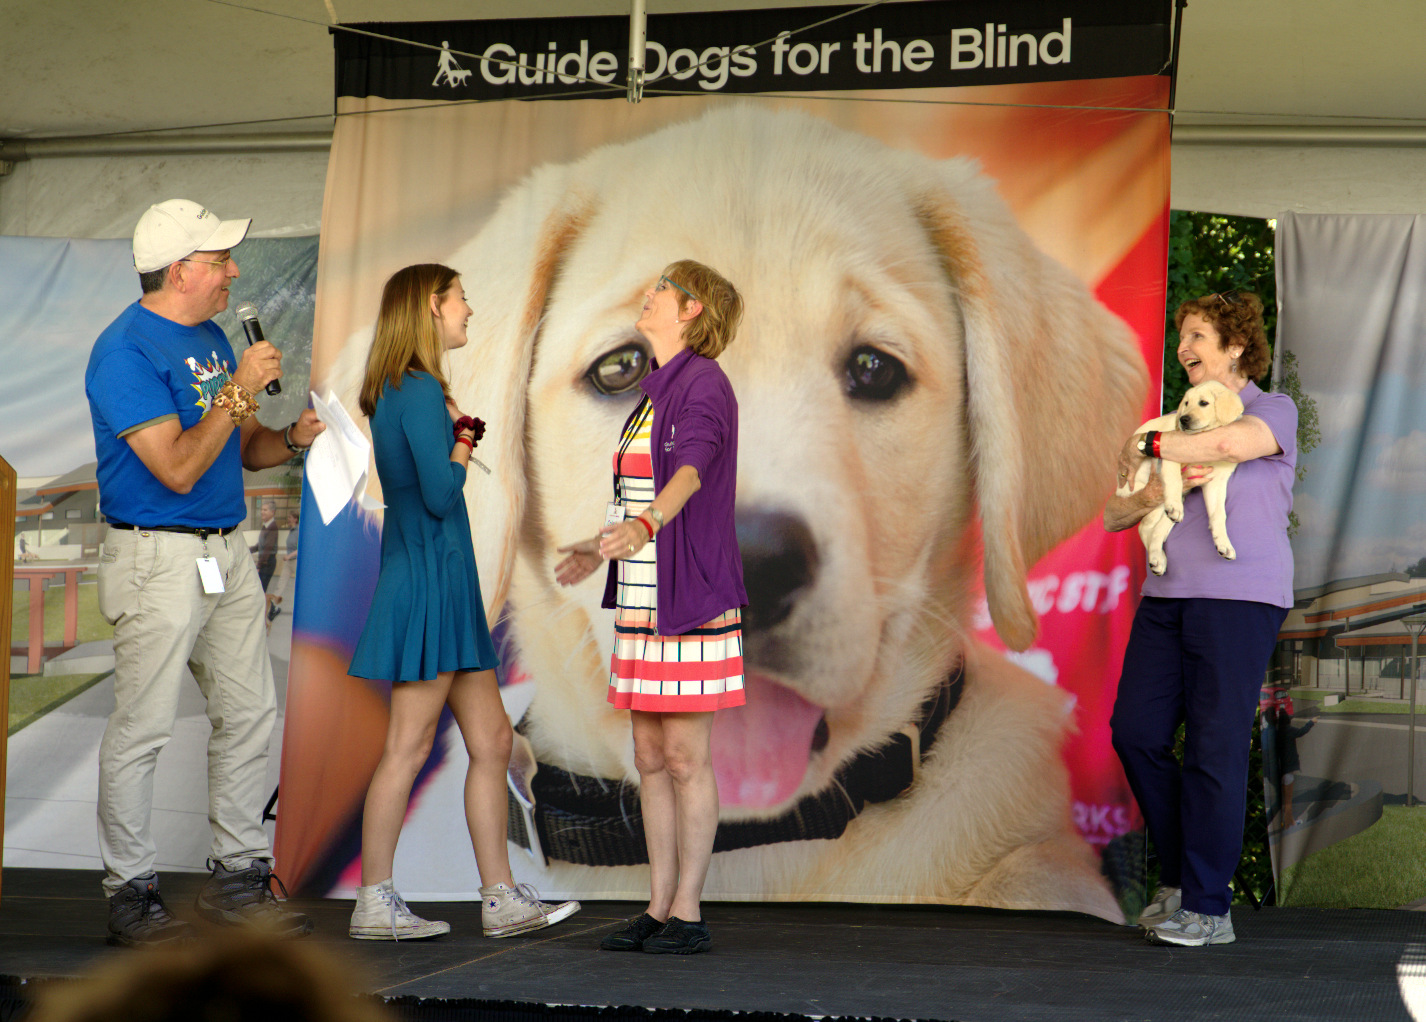 Pat presenting Zola III to Katherine and Colette at Fun Day